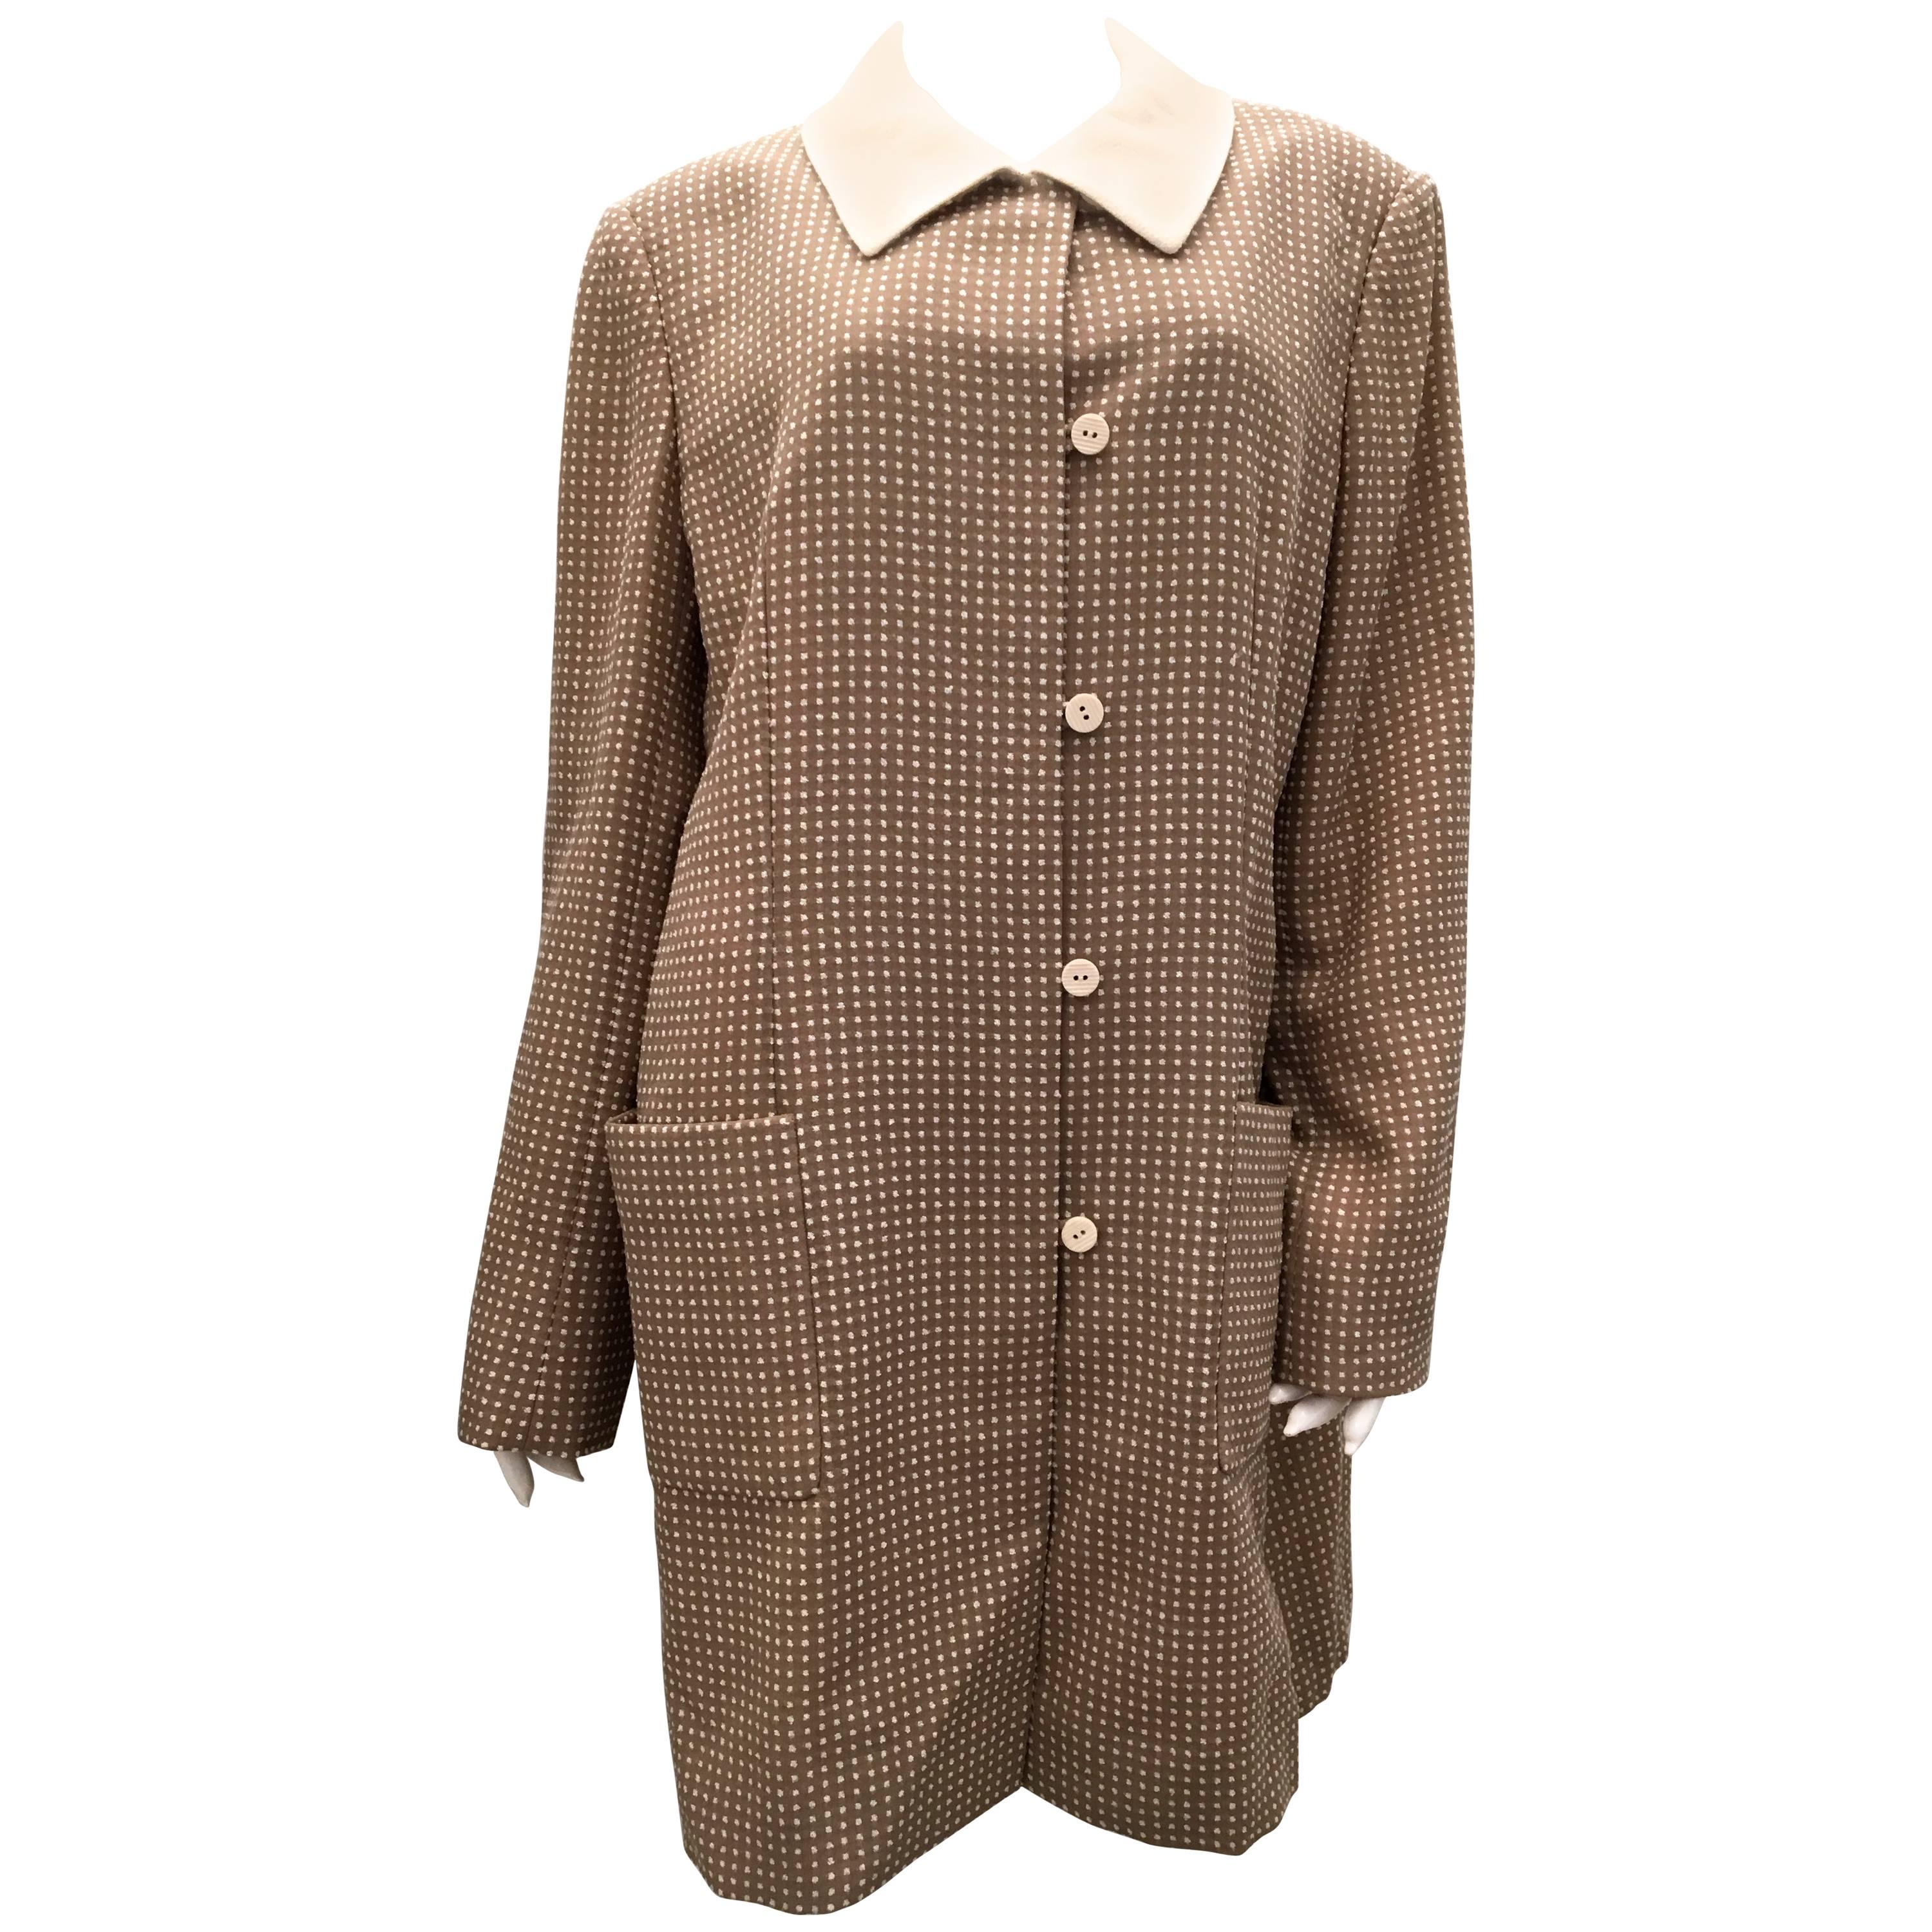 Bill Blass Coat - Beige and White - 1970's For Sale